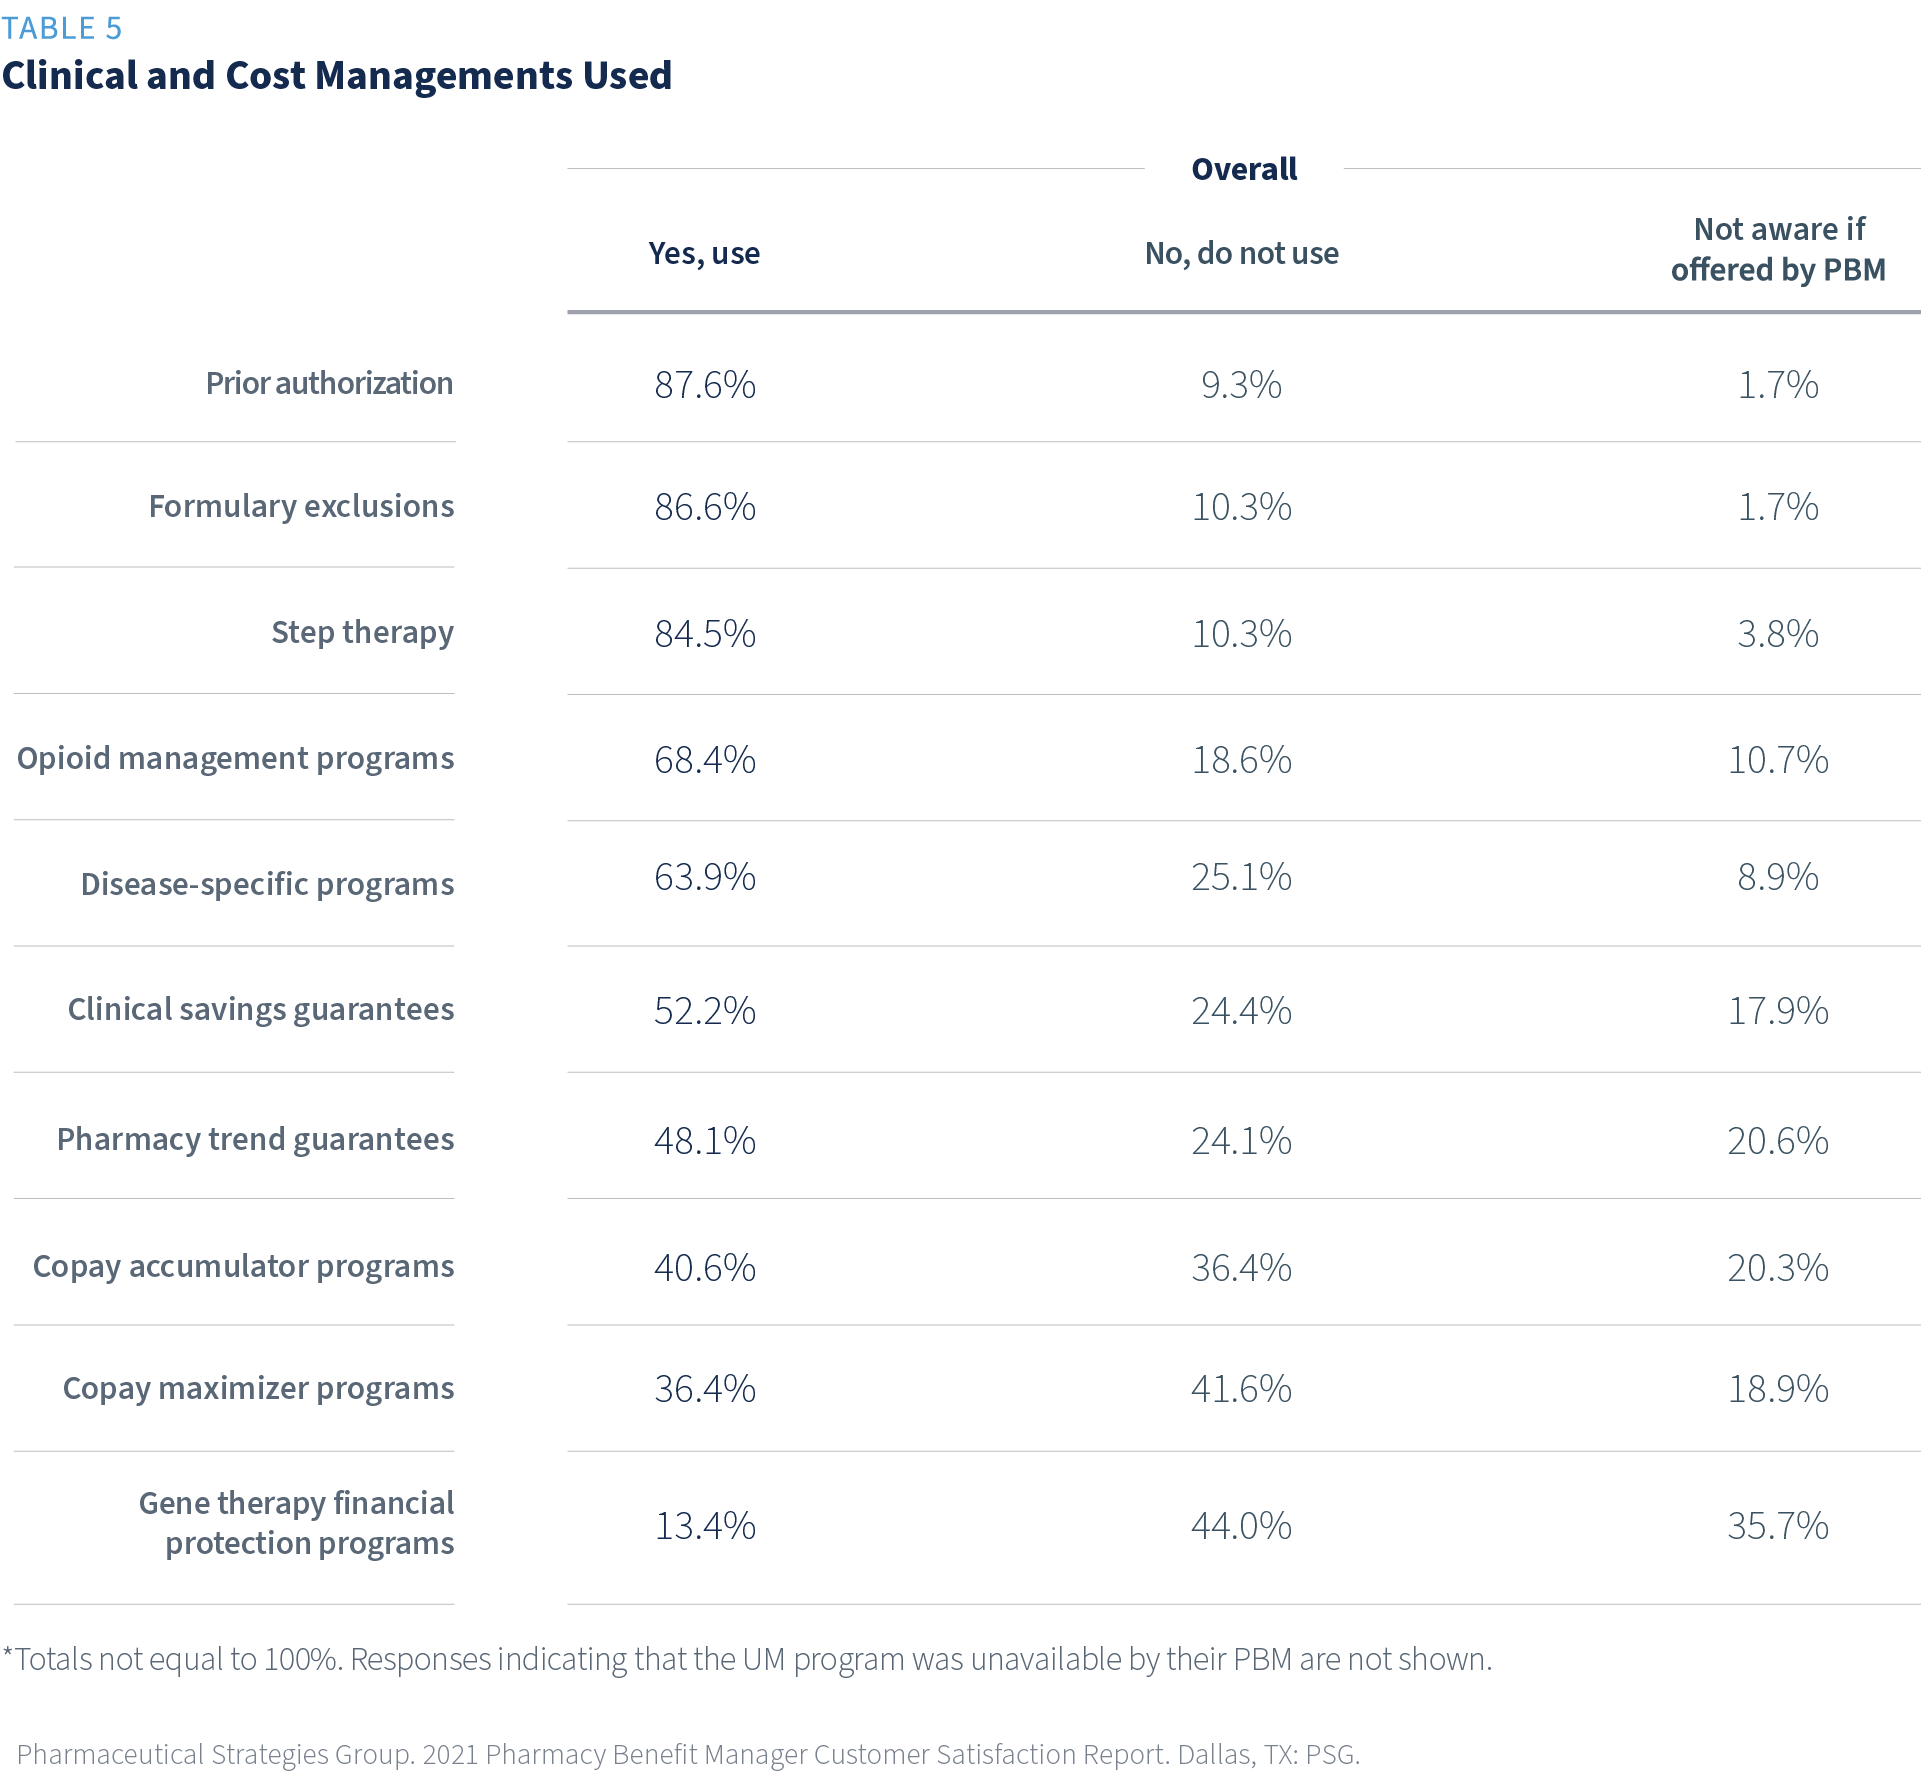 Chart depicting clinical cost management strategies used